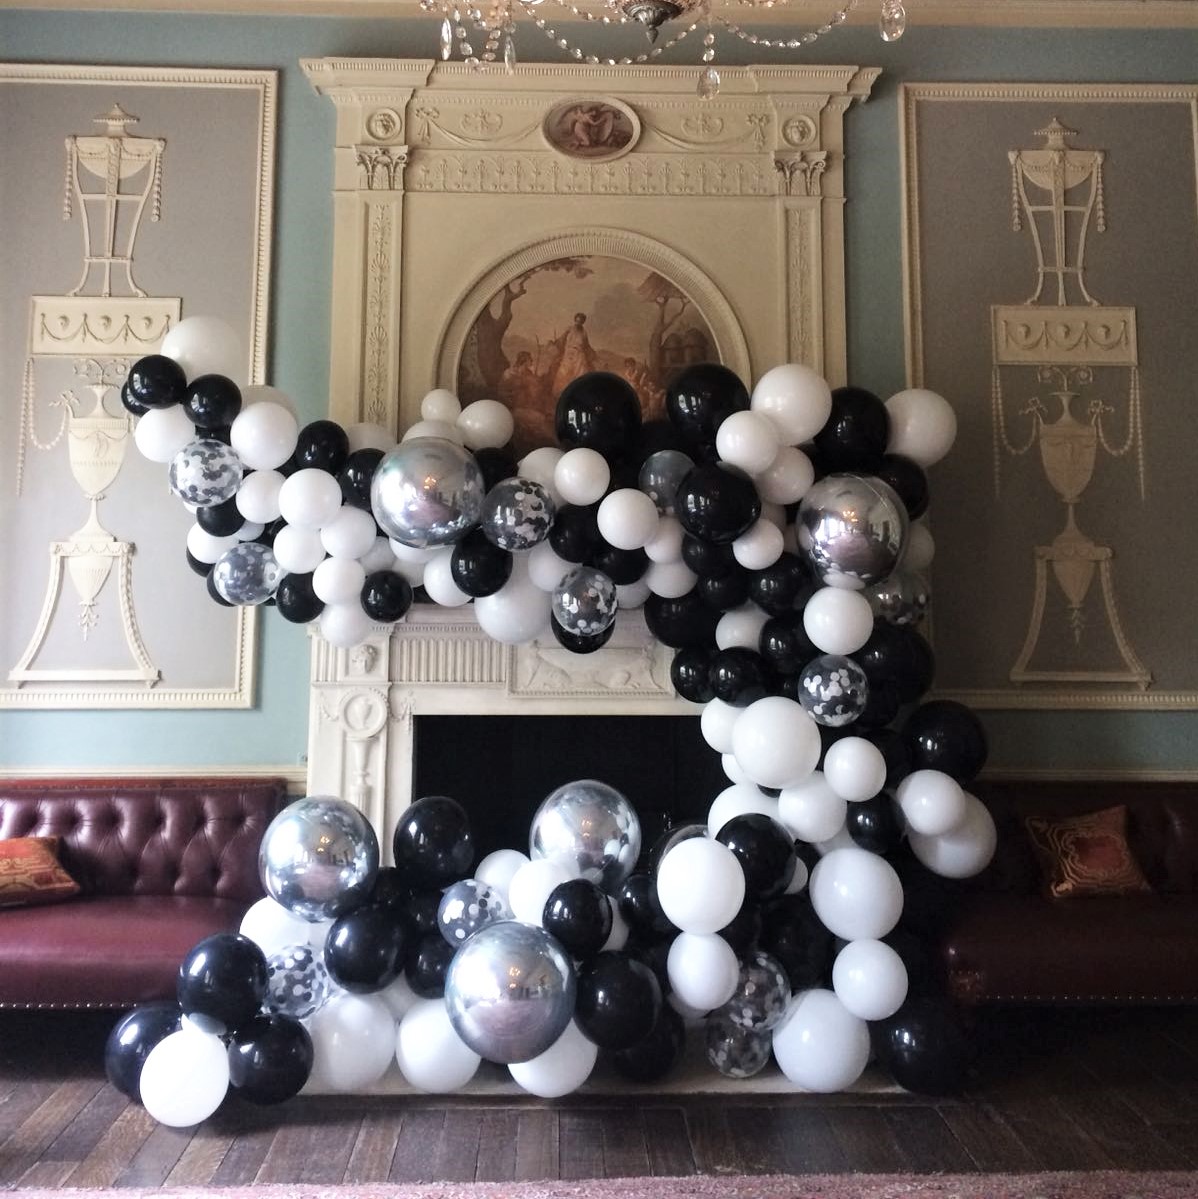 Fireplace Balloons